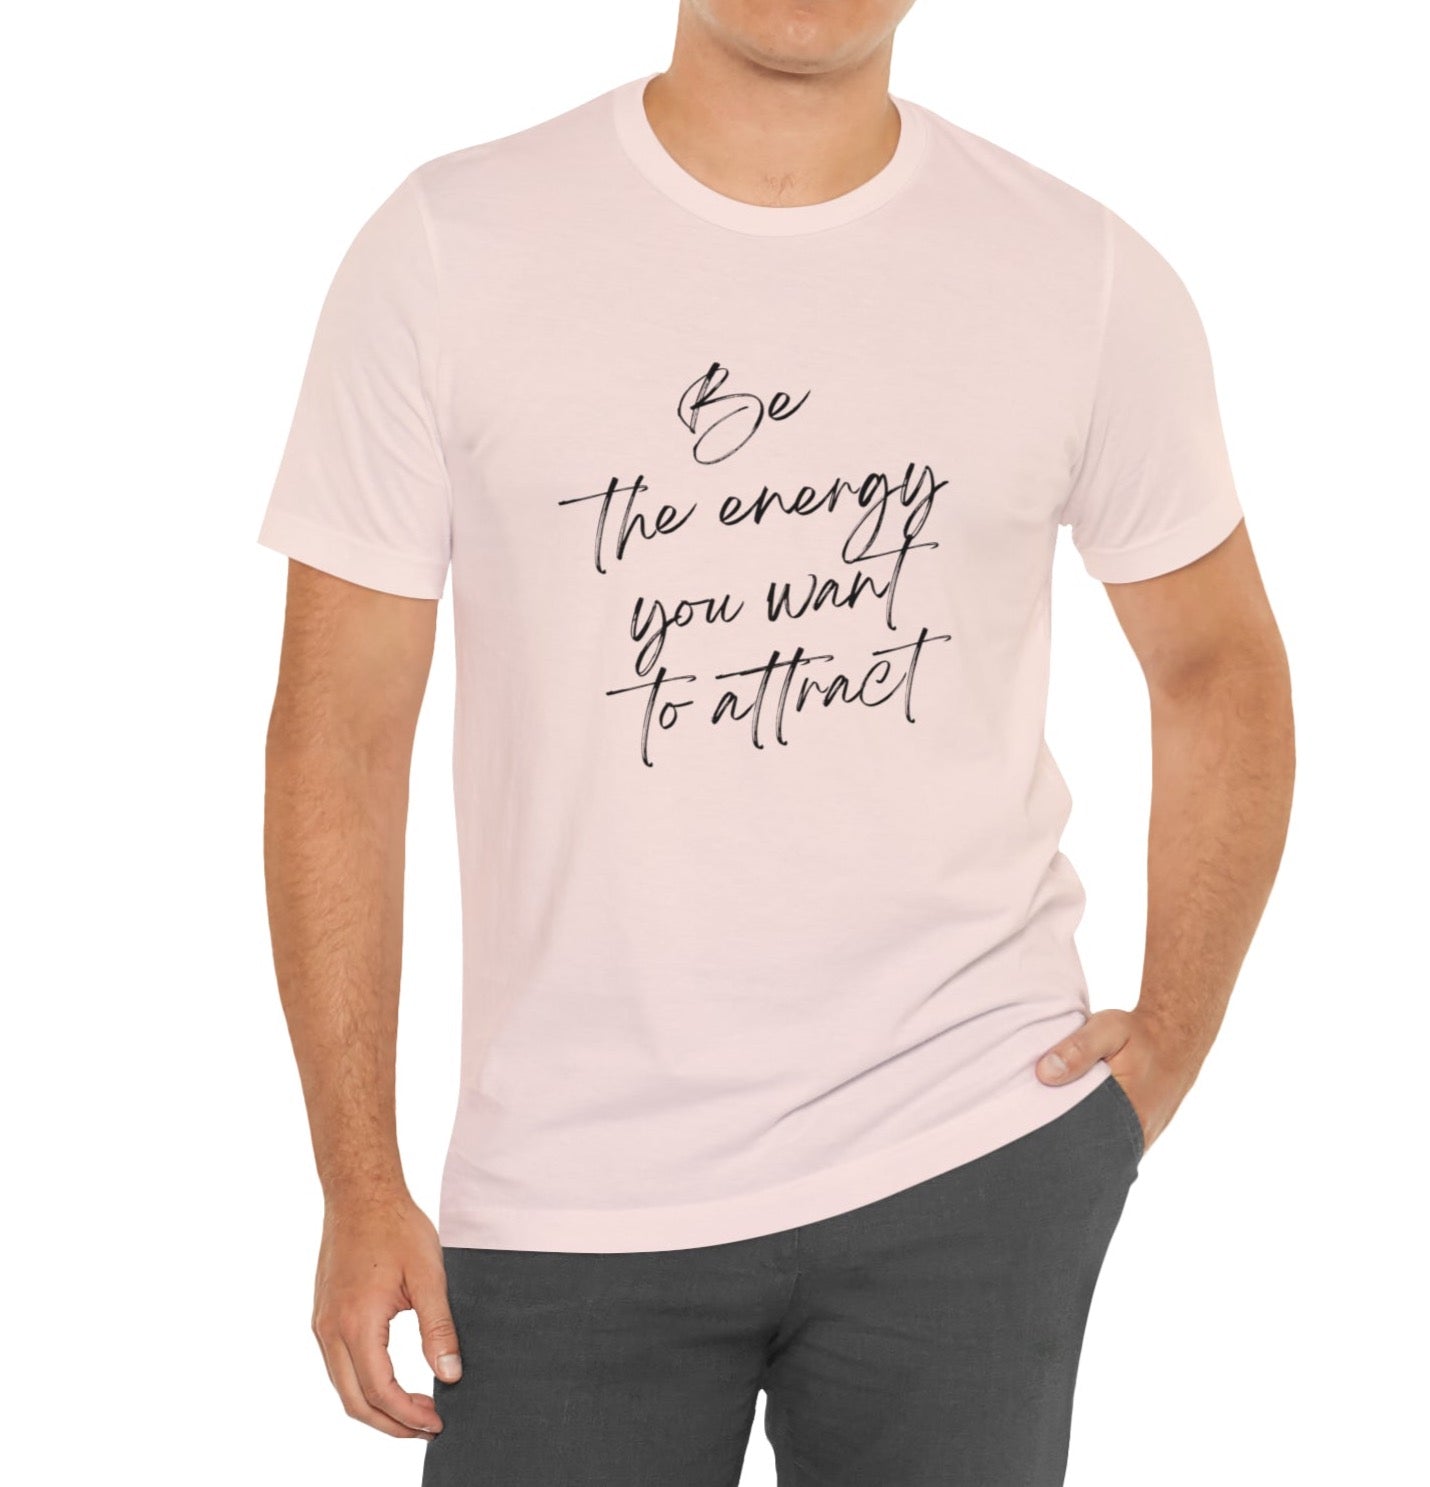 Be the change you want to see in the world Unisex Jersey Short Sleeve Tee